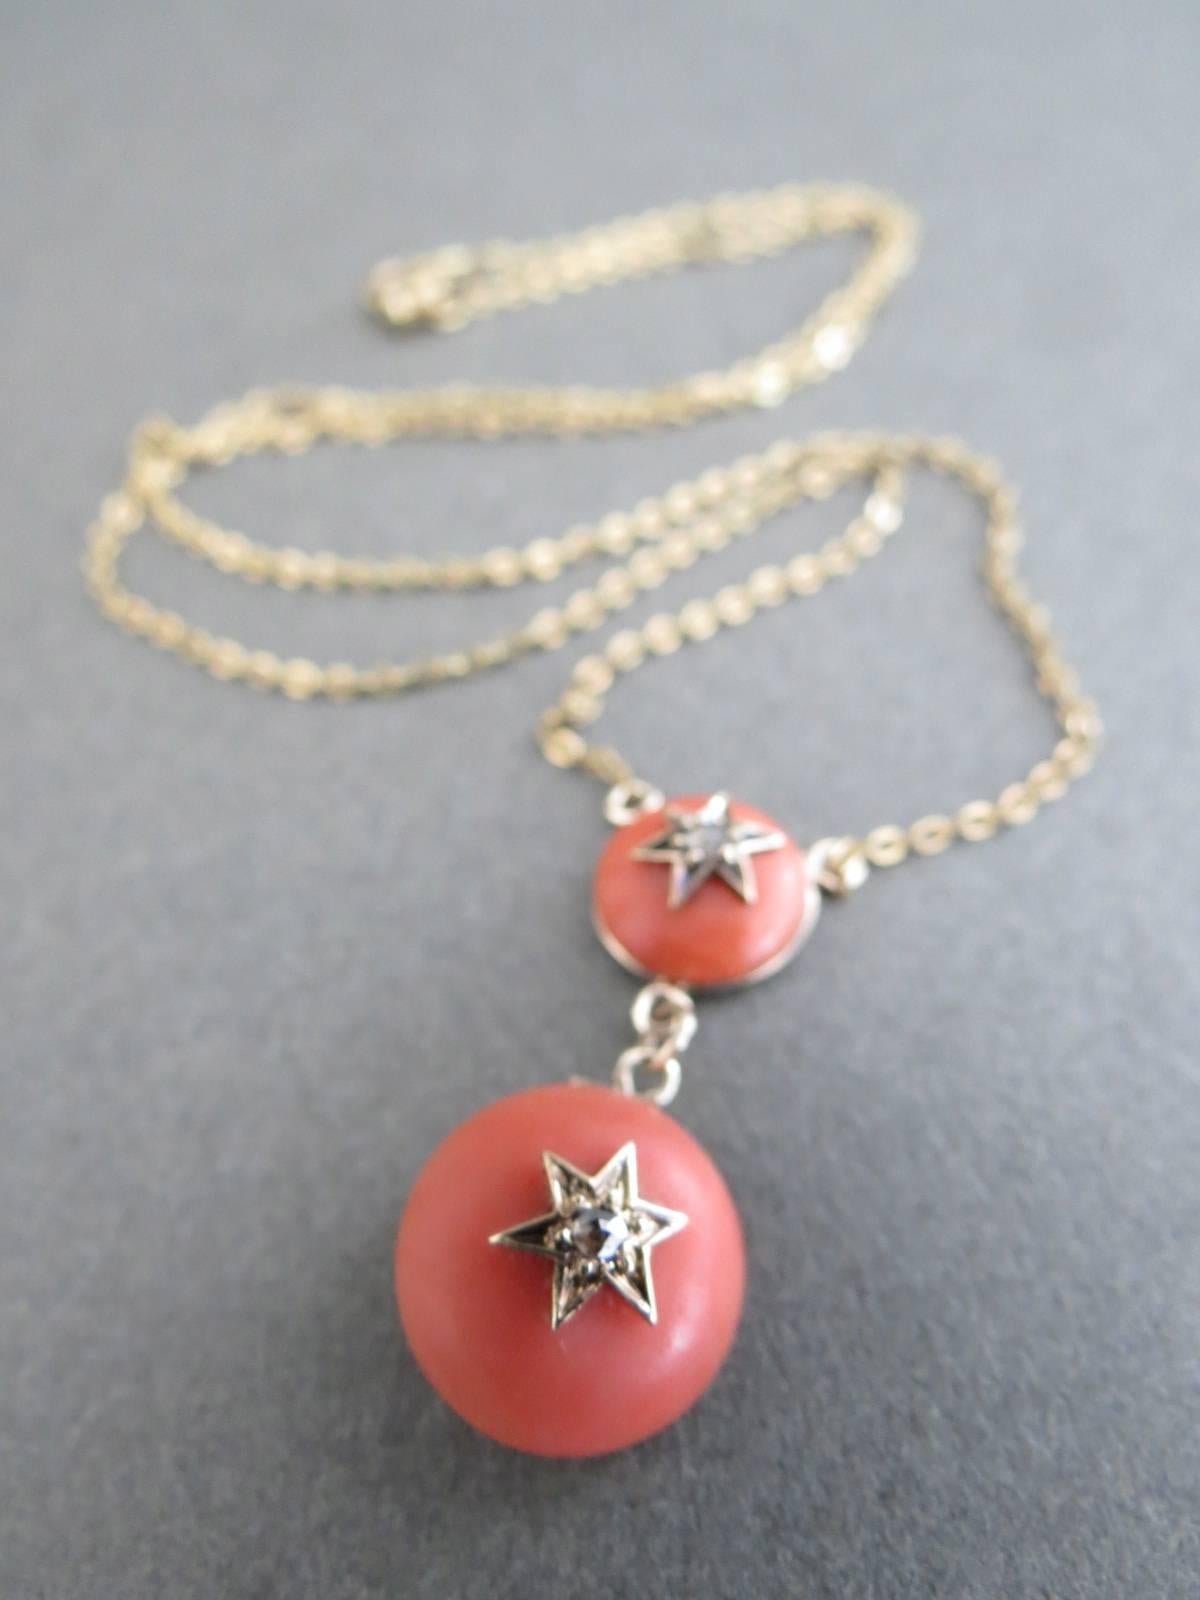 This is lovely hand made 9ct gold diamond and salmon coral pendant necklace.
Item Specifics
Length: 47cm (approx 18.50